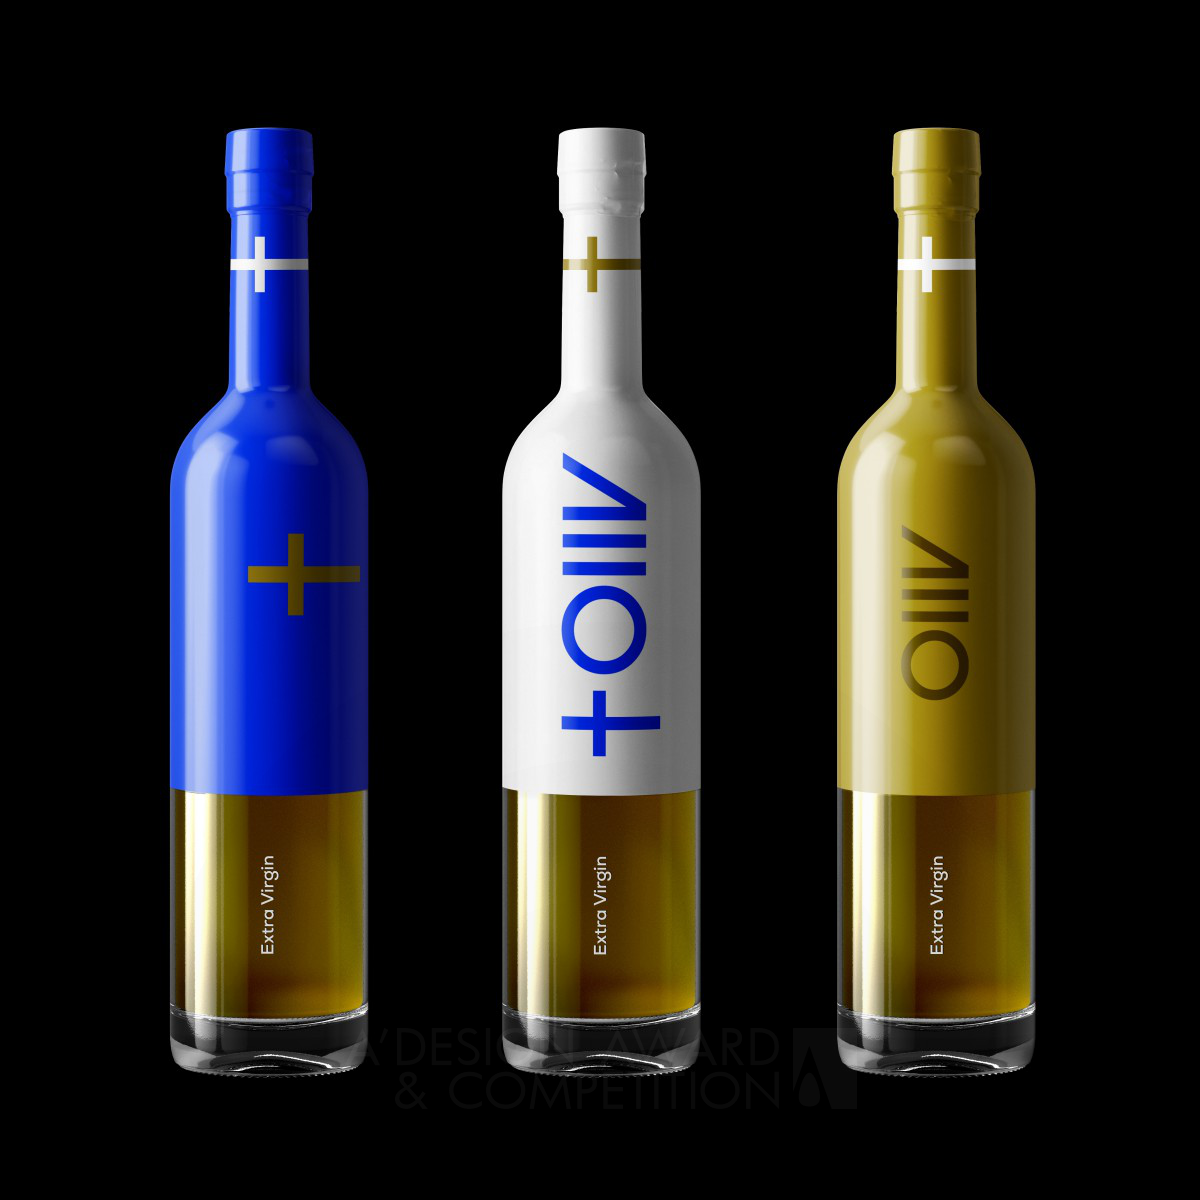 Introducing Oliv: A Unique Extra Virgin Olive Oil Brand from Sweden